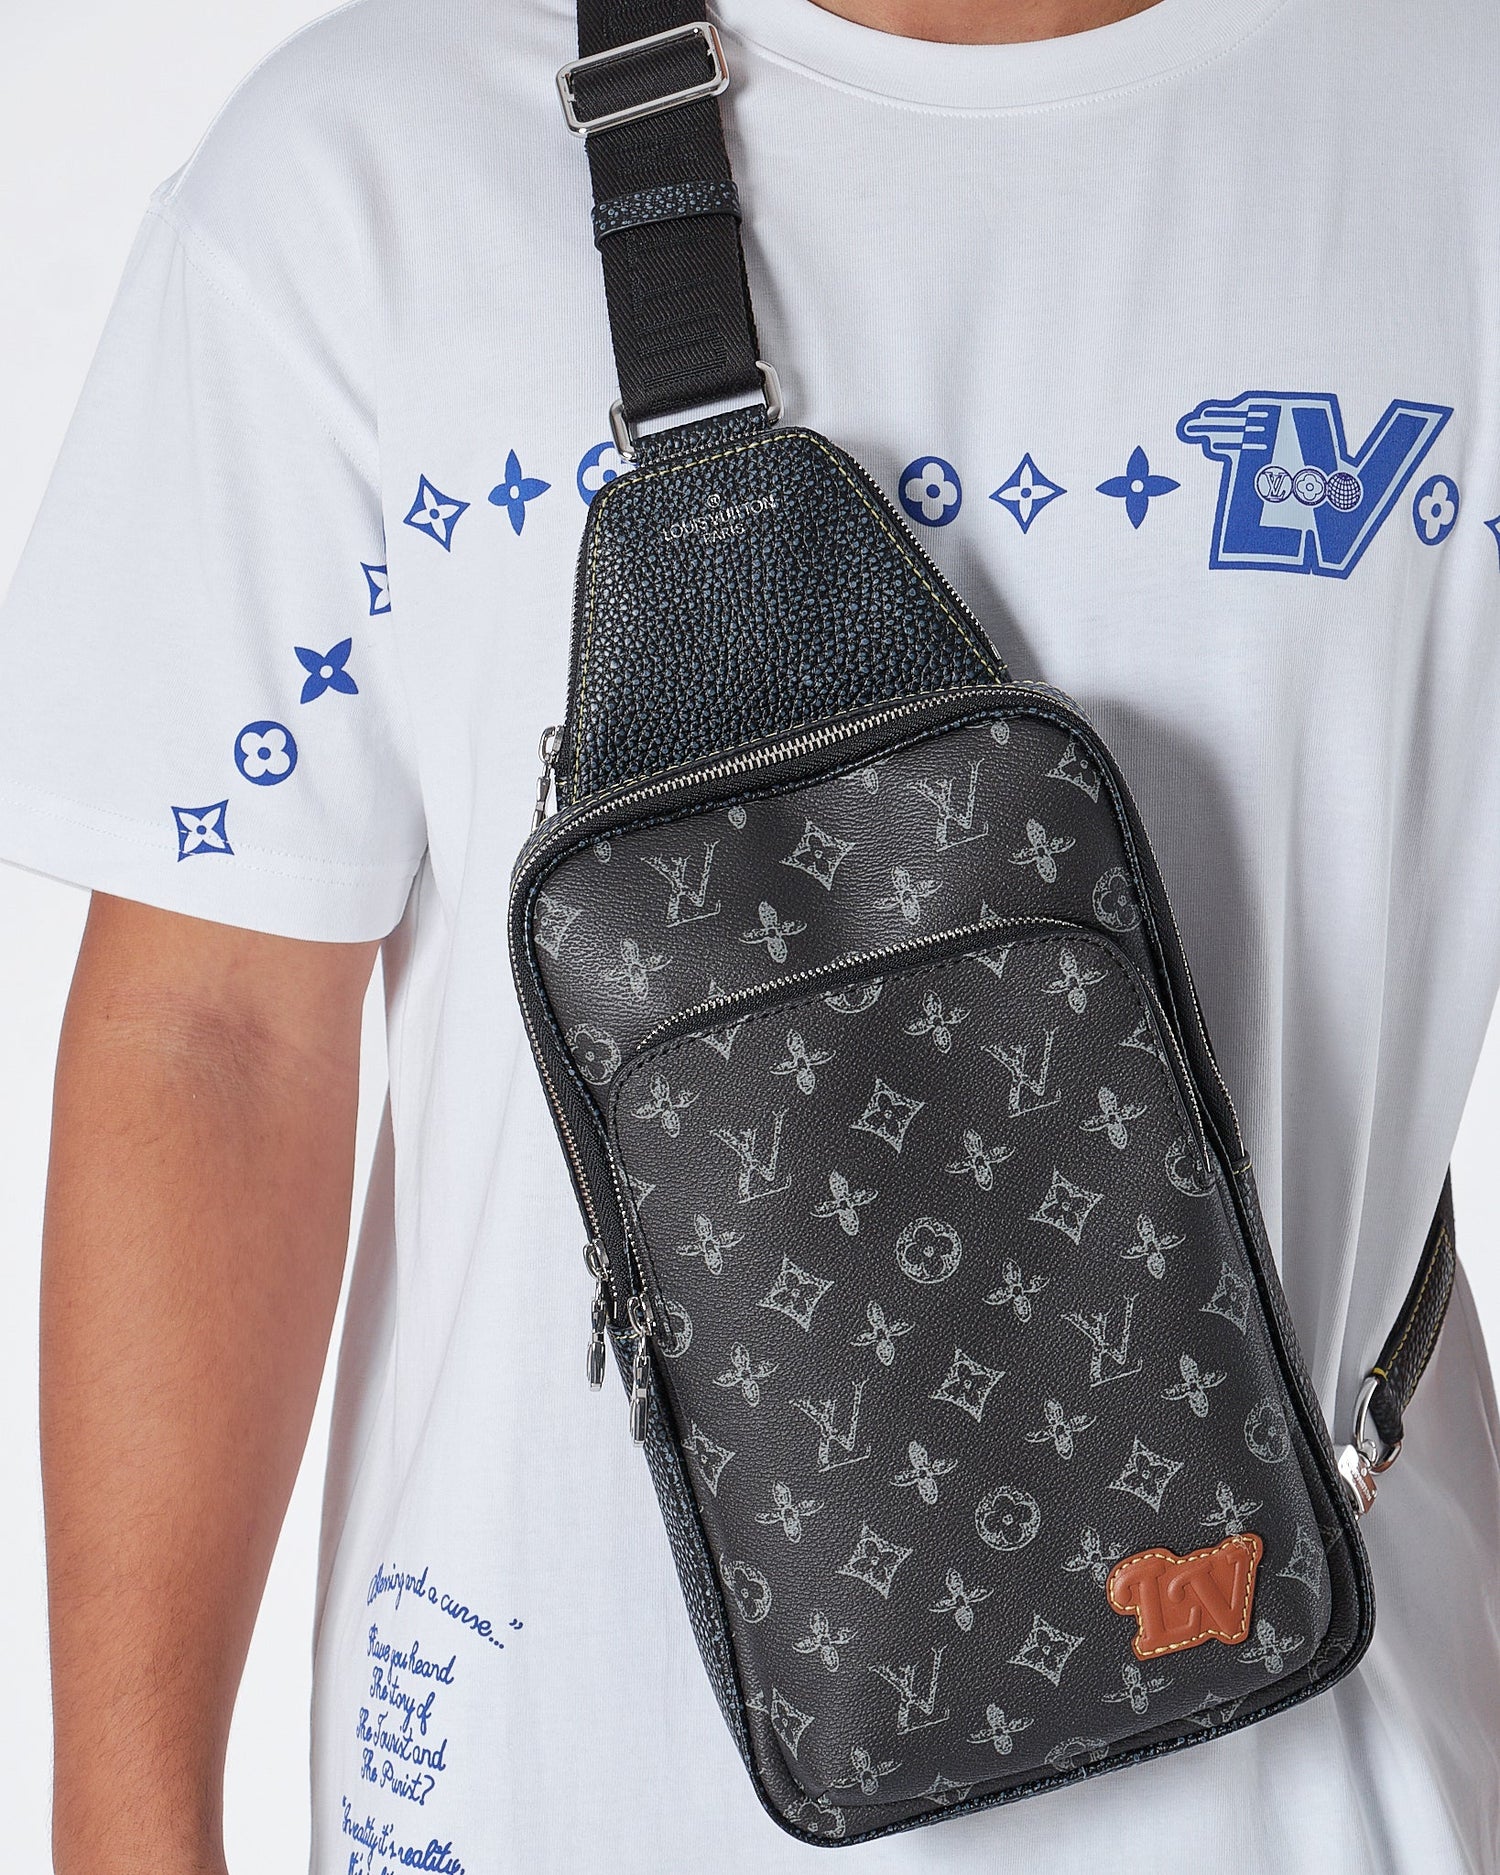 New Monogram Louis Vuitton Bags - 185 For Sale on 1stDibs